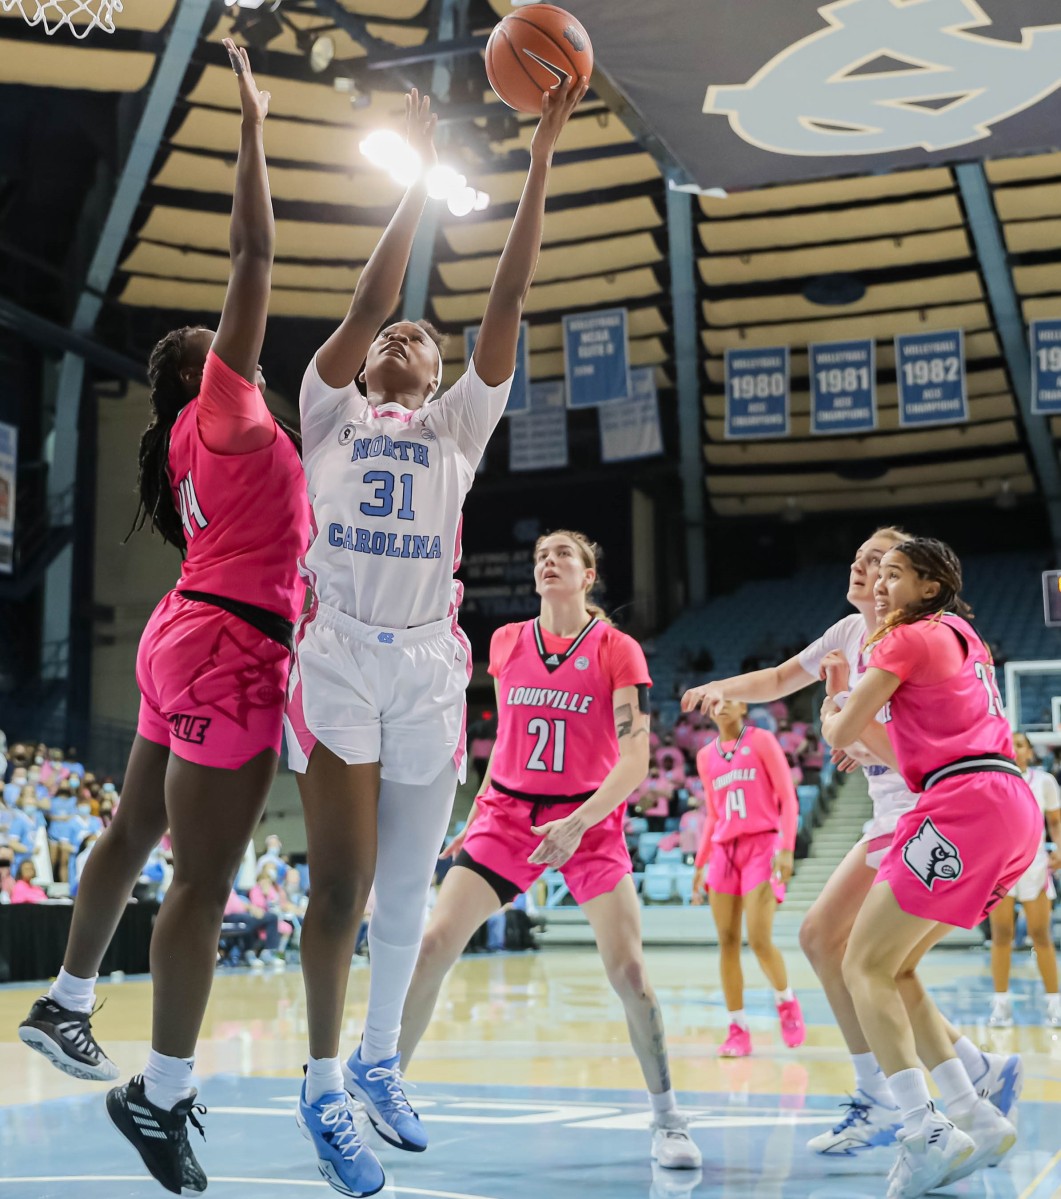 UNC Women's Basketball jumps to highest AP ranking in 7 years